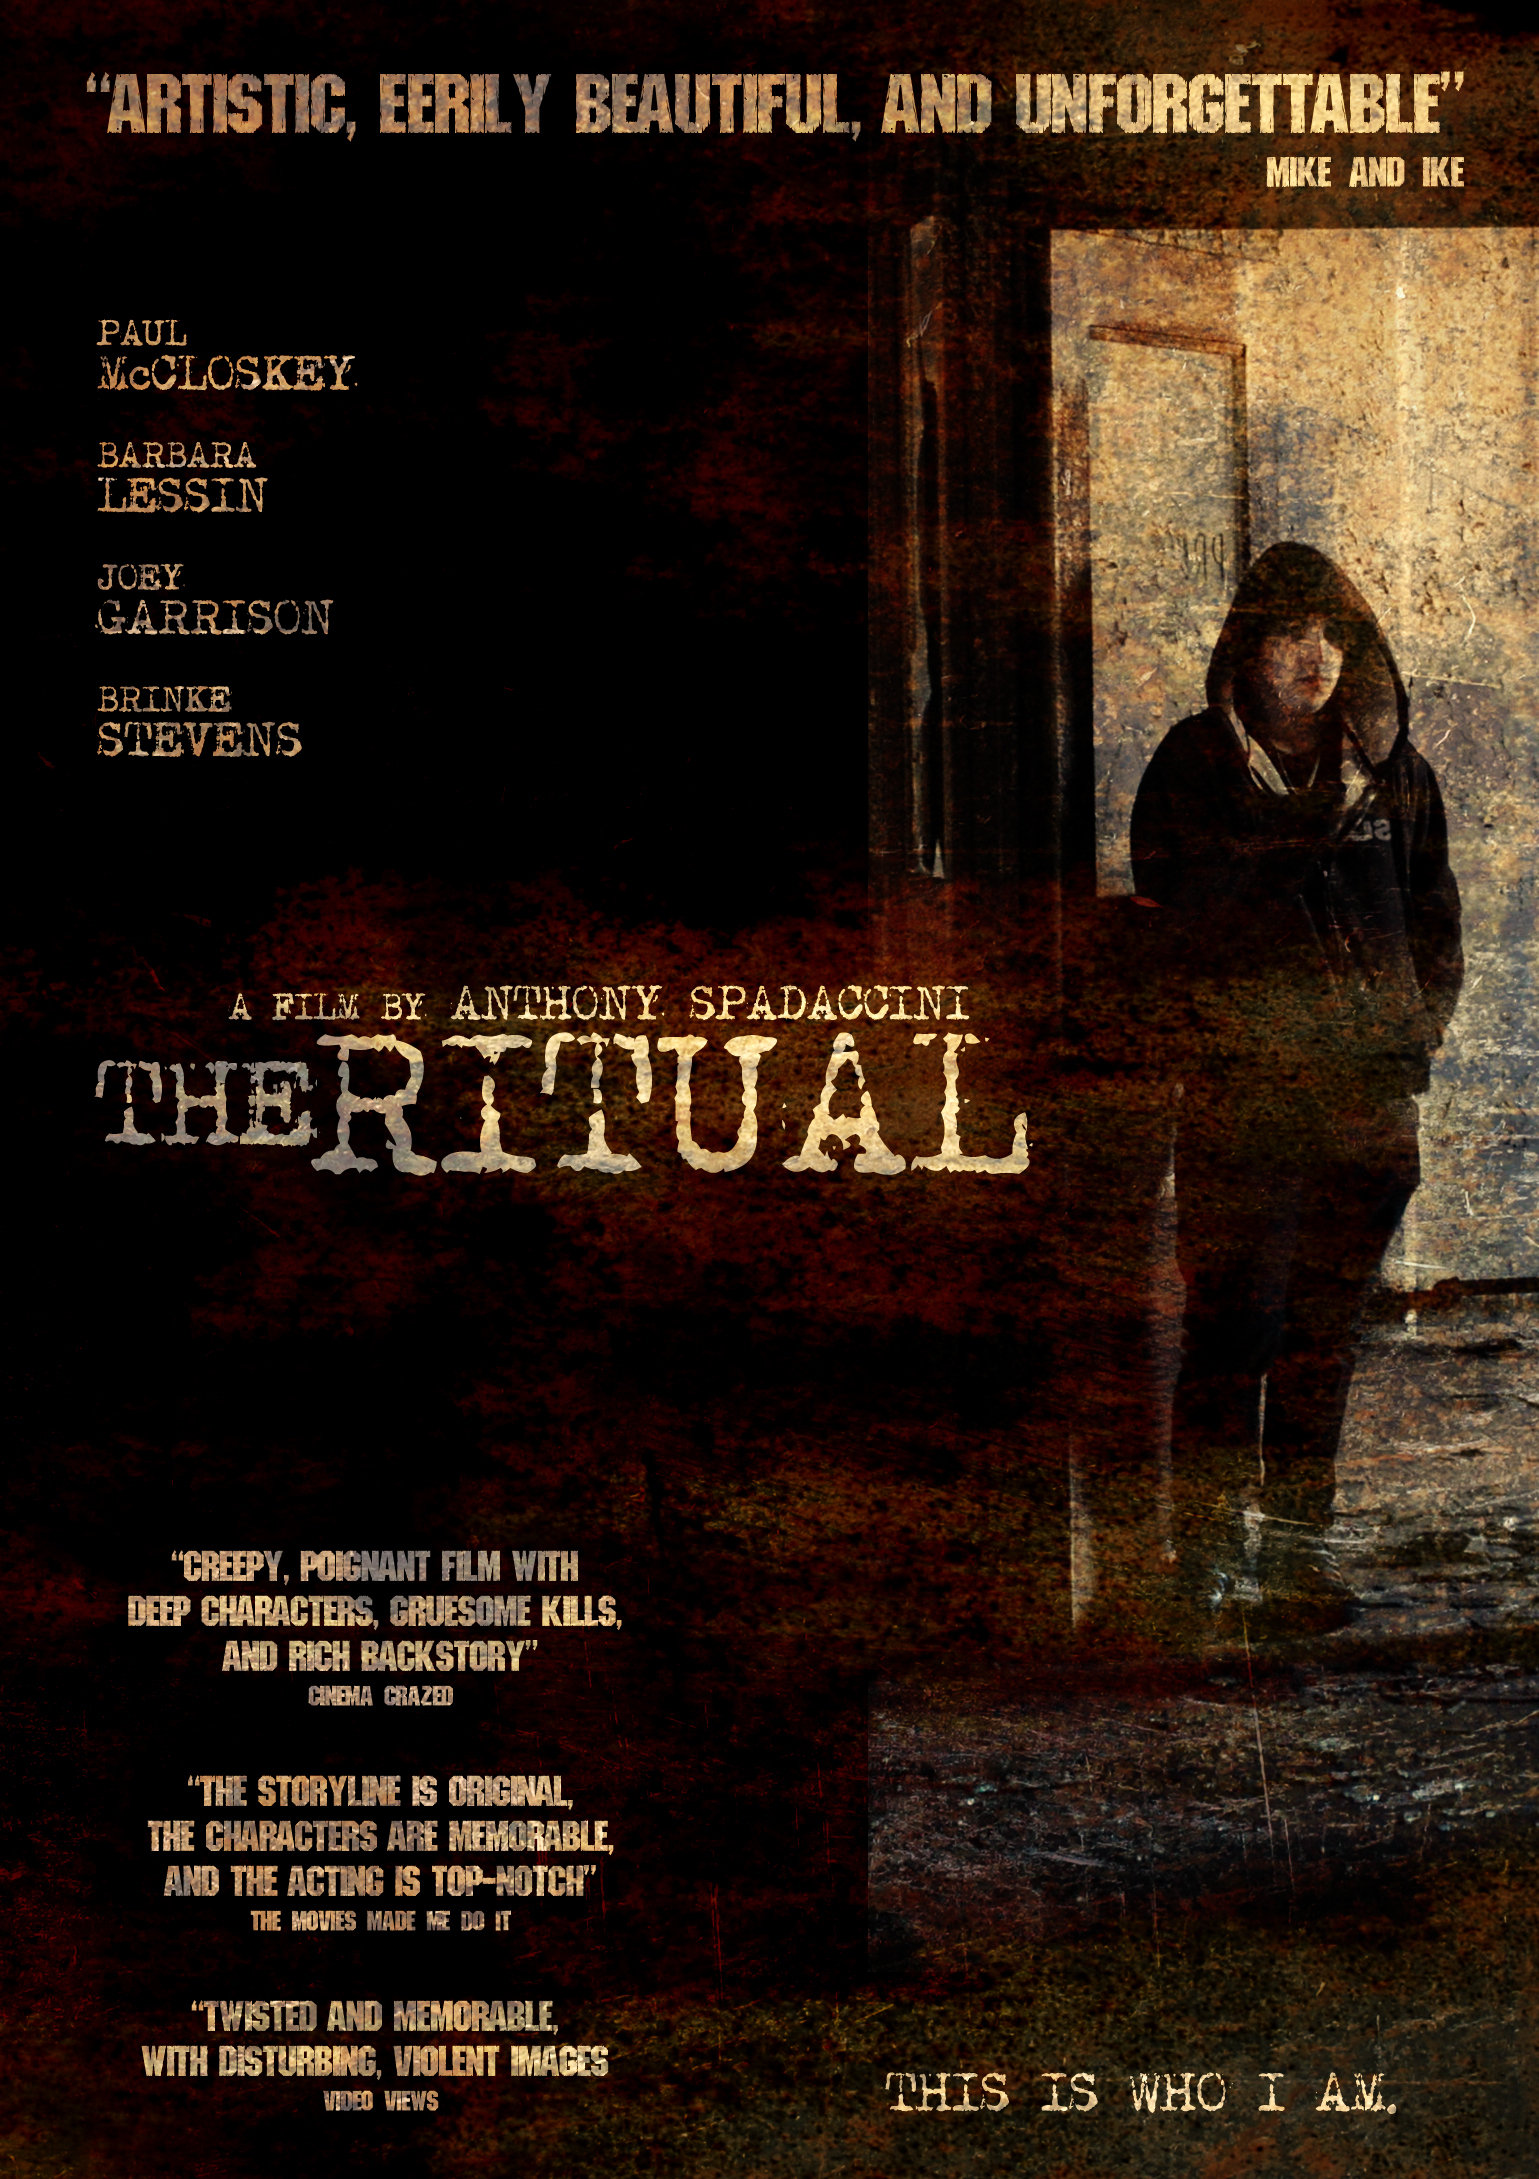 The Ritual (Theatrical/DVD Poster)